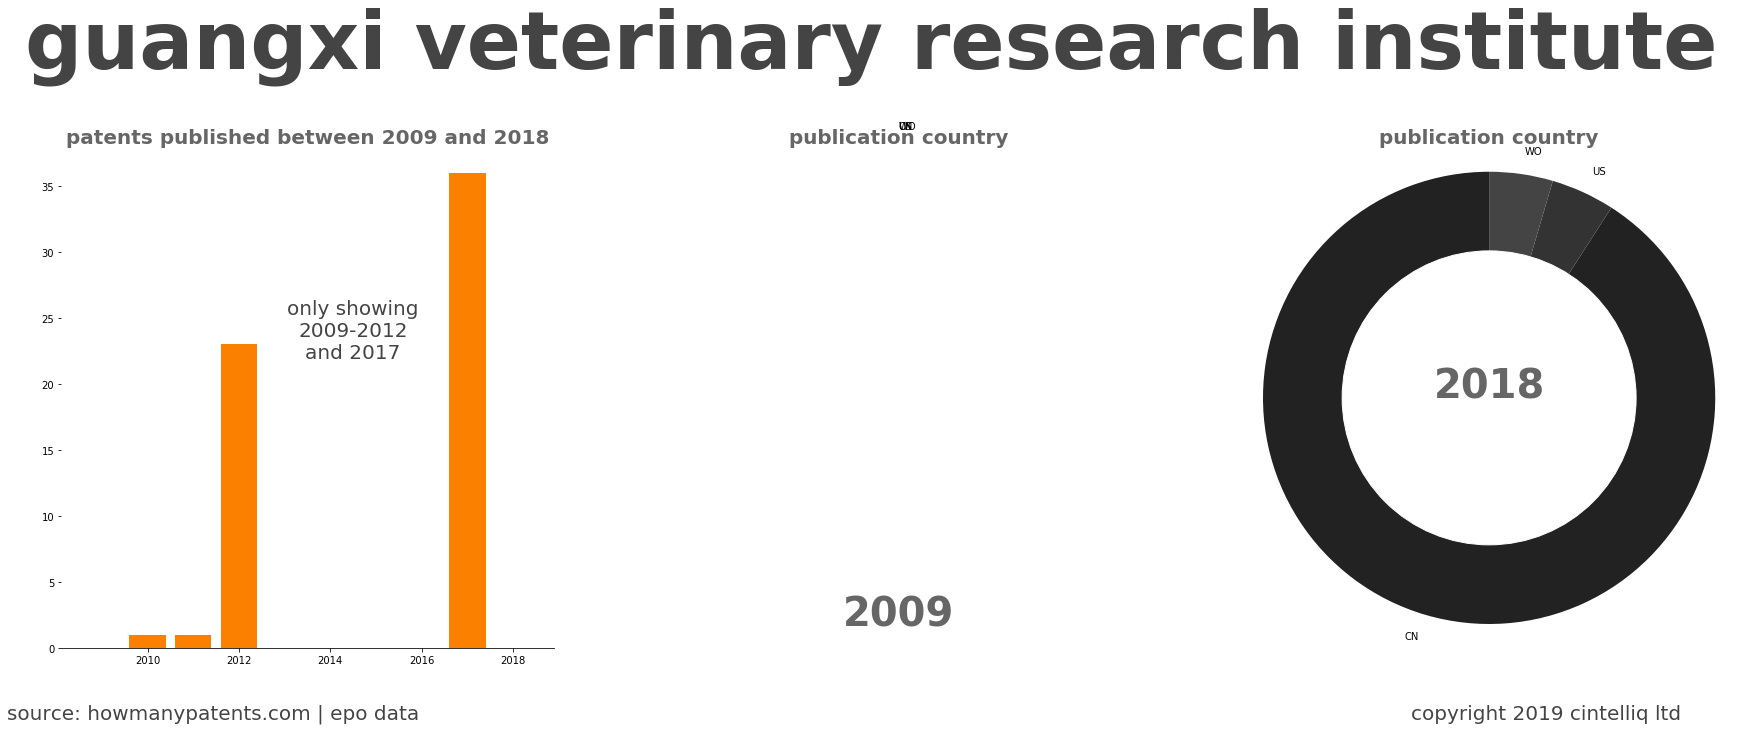 summary of patents for Guangxi Veterinary Research Institute